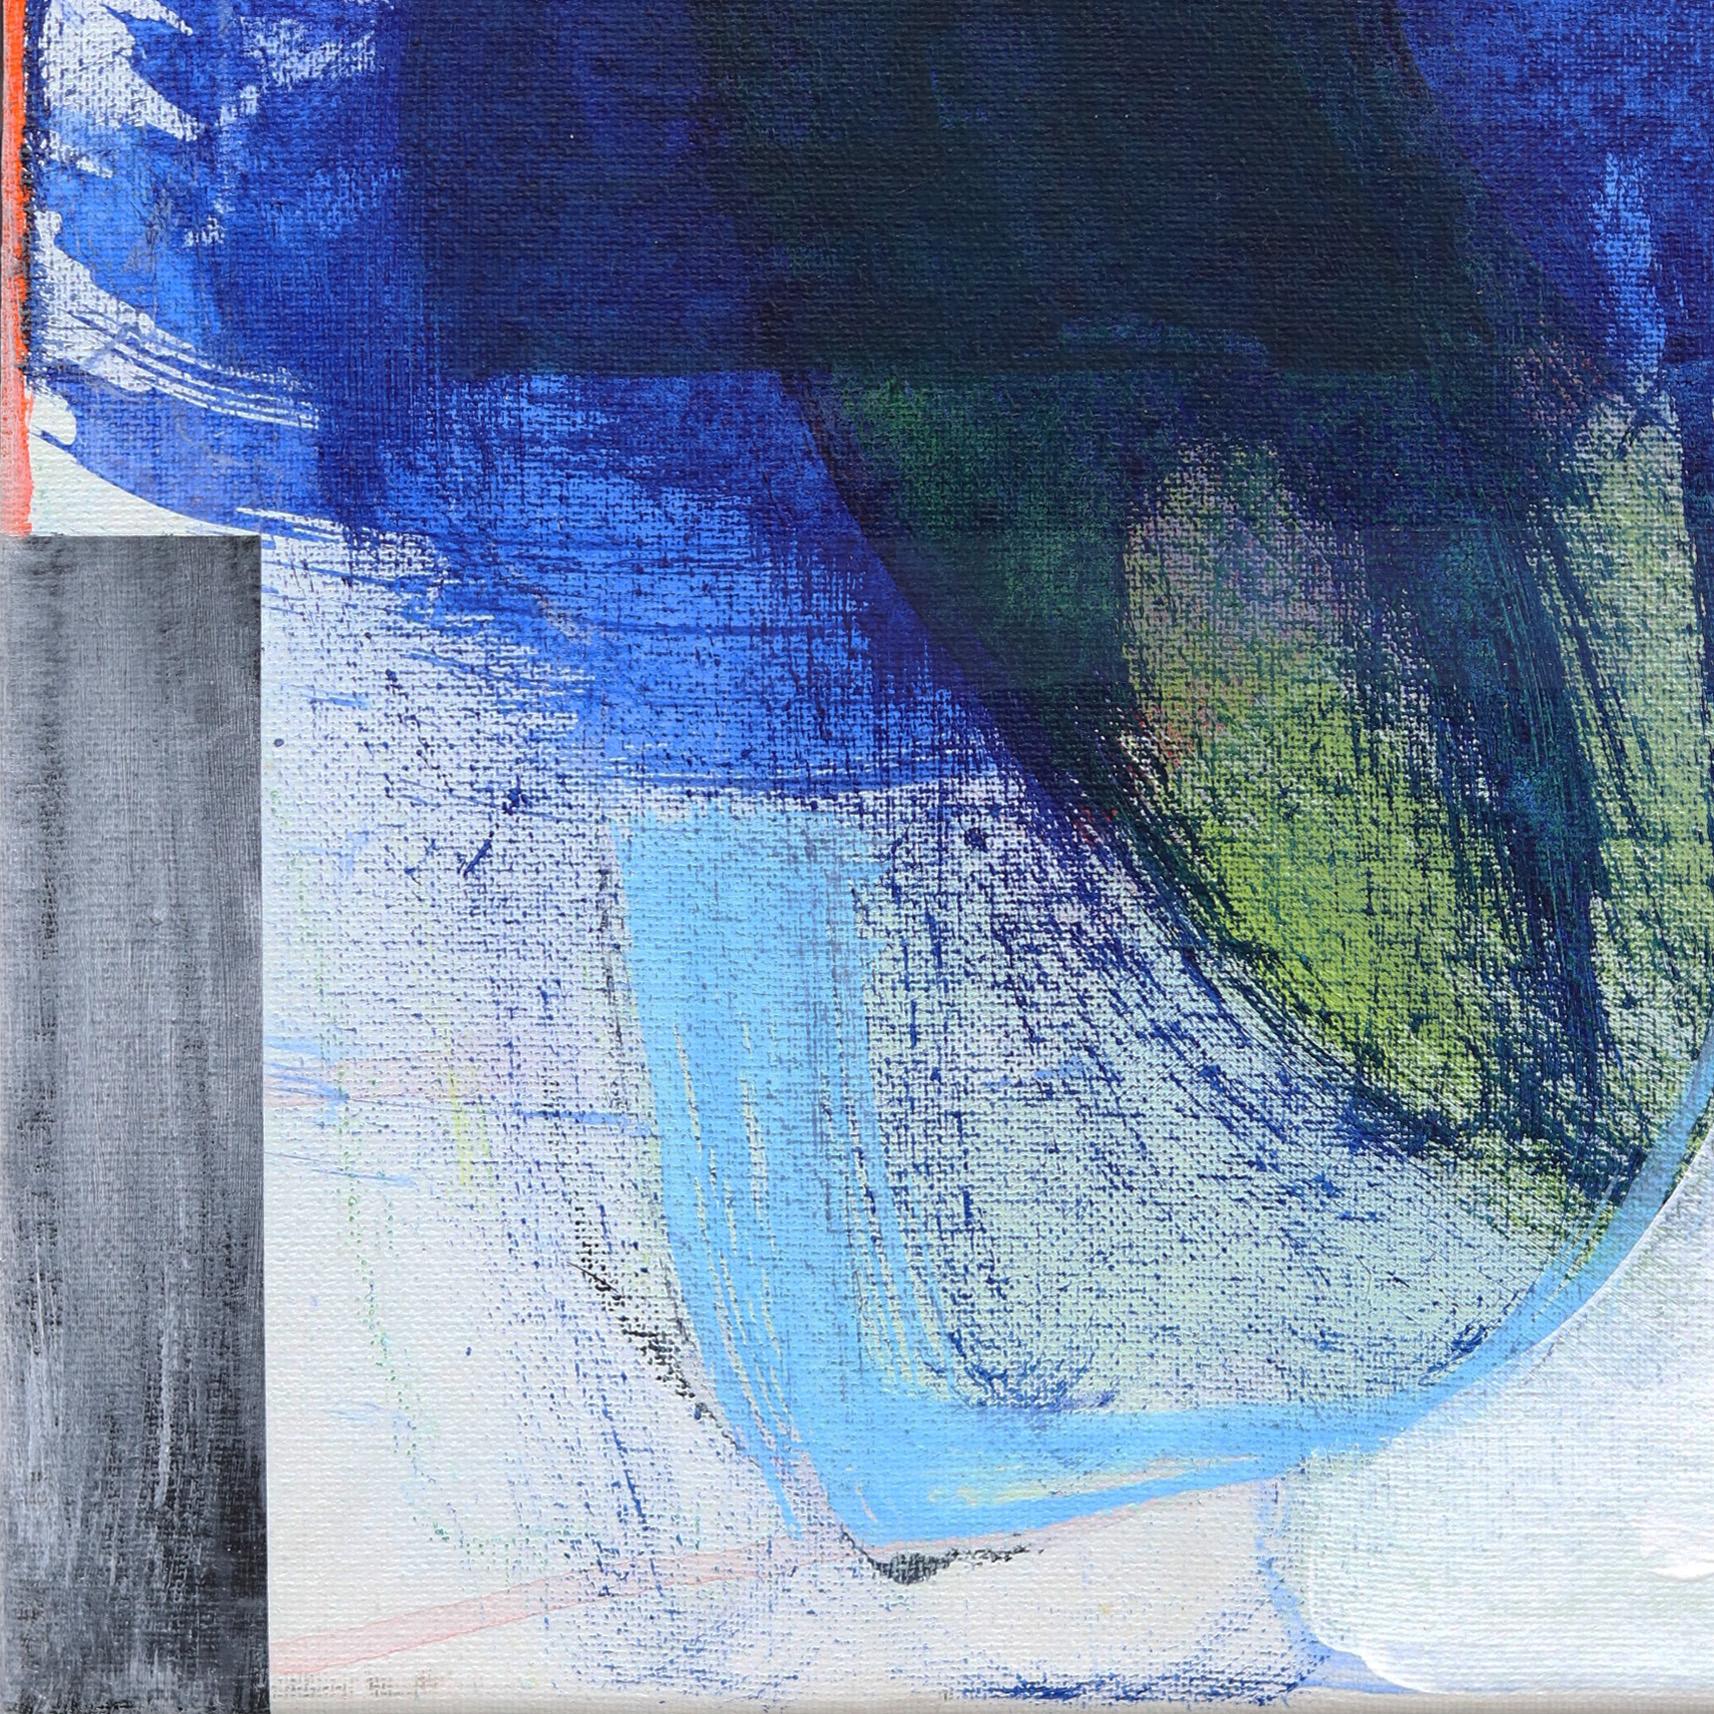 Prayer Flags #1 - Blue Abstract Painting by Jodi Fuchs